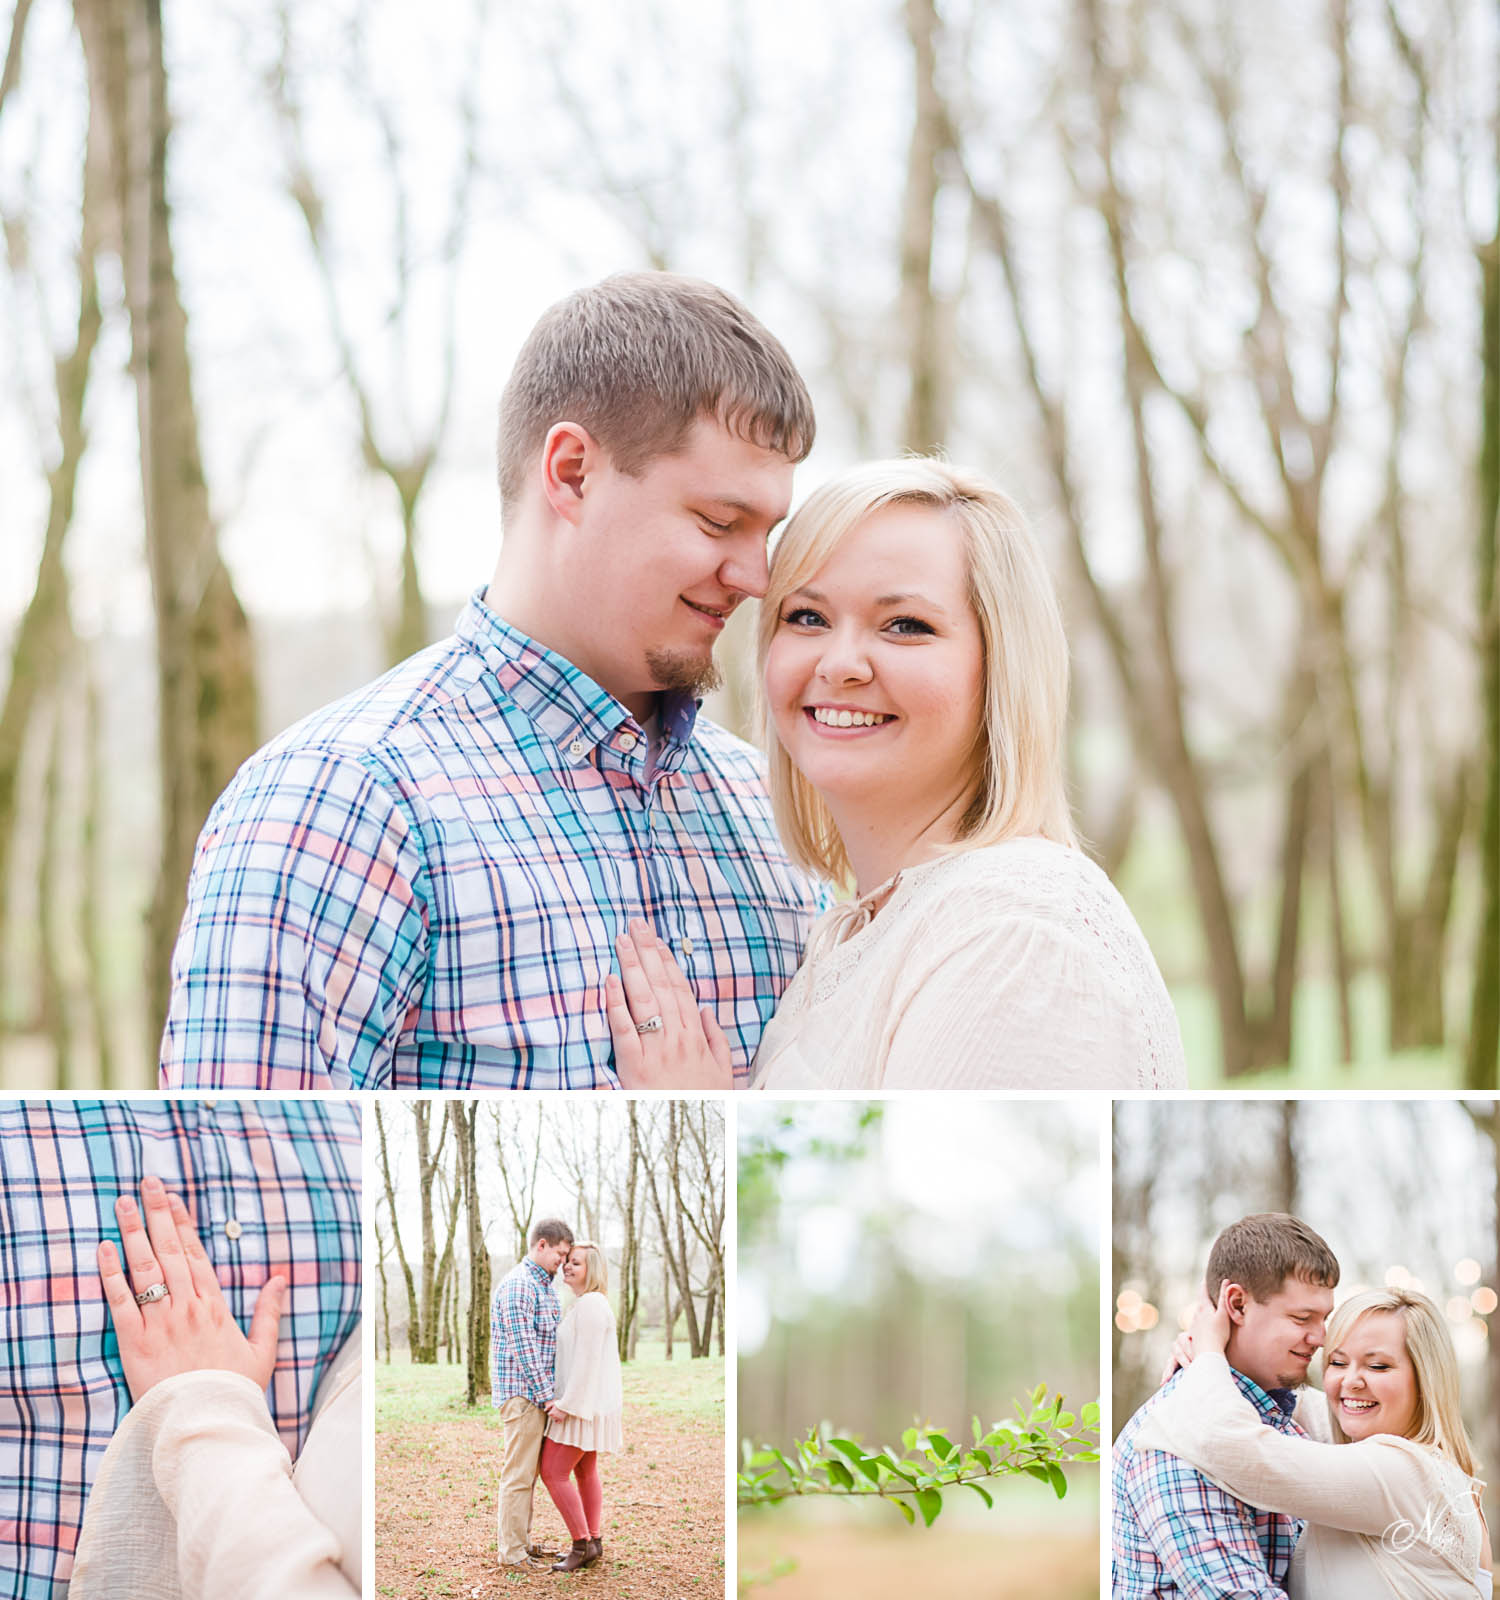 sPRING ENGAGEMENT AT HIWASSEE RIVER WEDDINGS WEARING PASTELS IN CREAM, CORAL AND BLUE